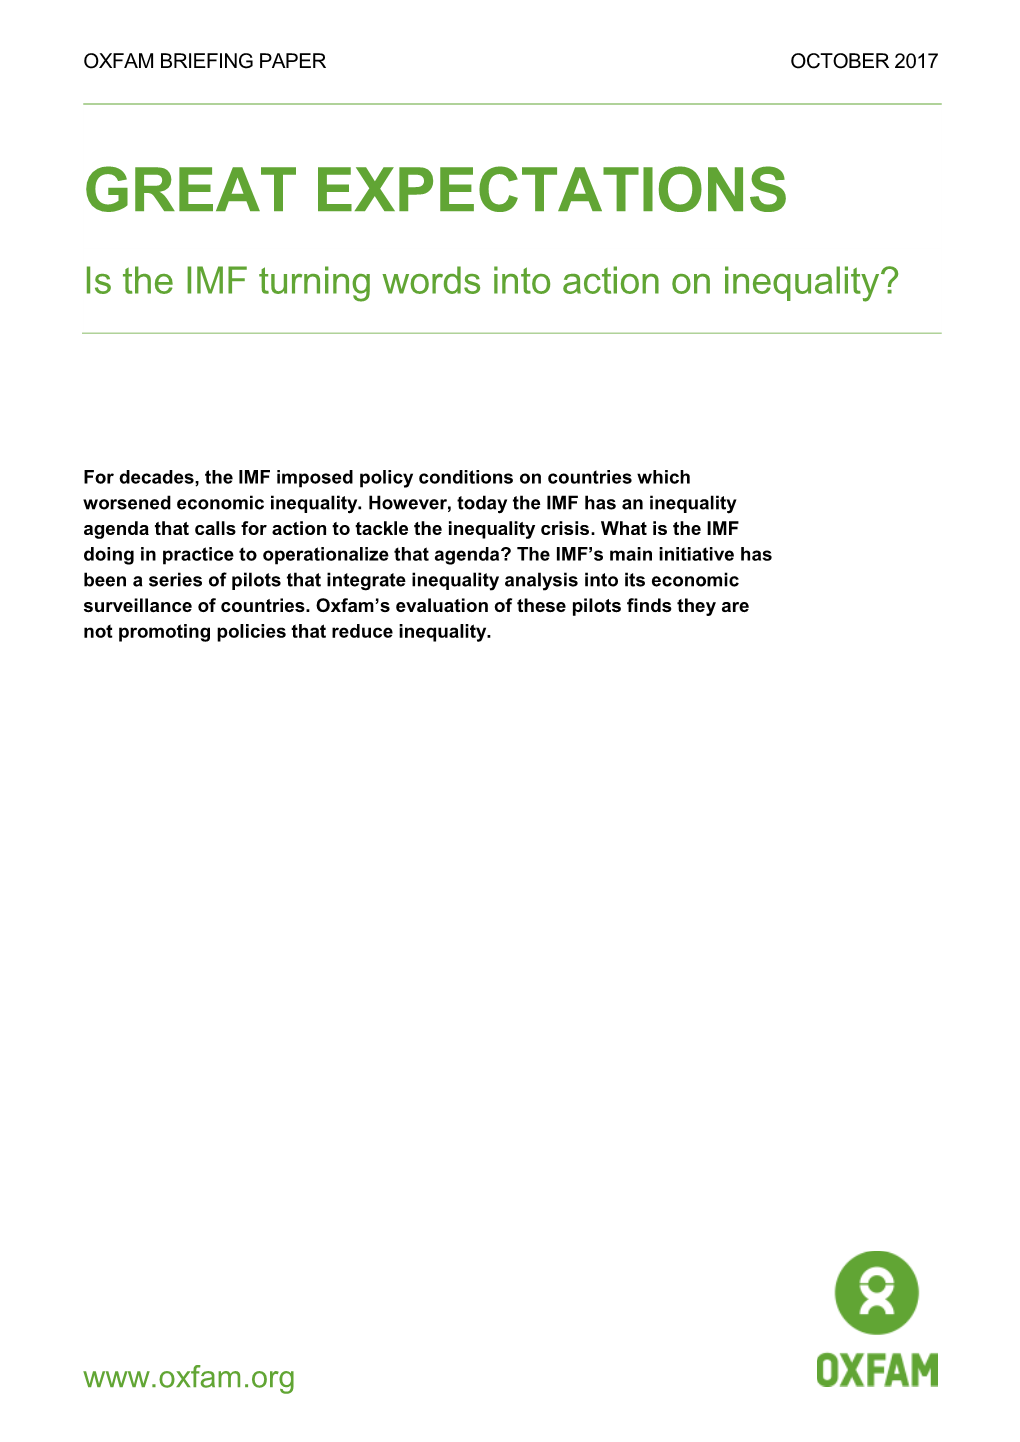 Great Expectations: Is the IMF Turning Words Into Action on Inequality?